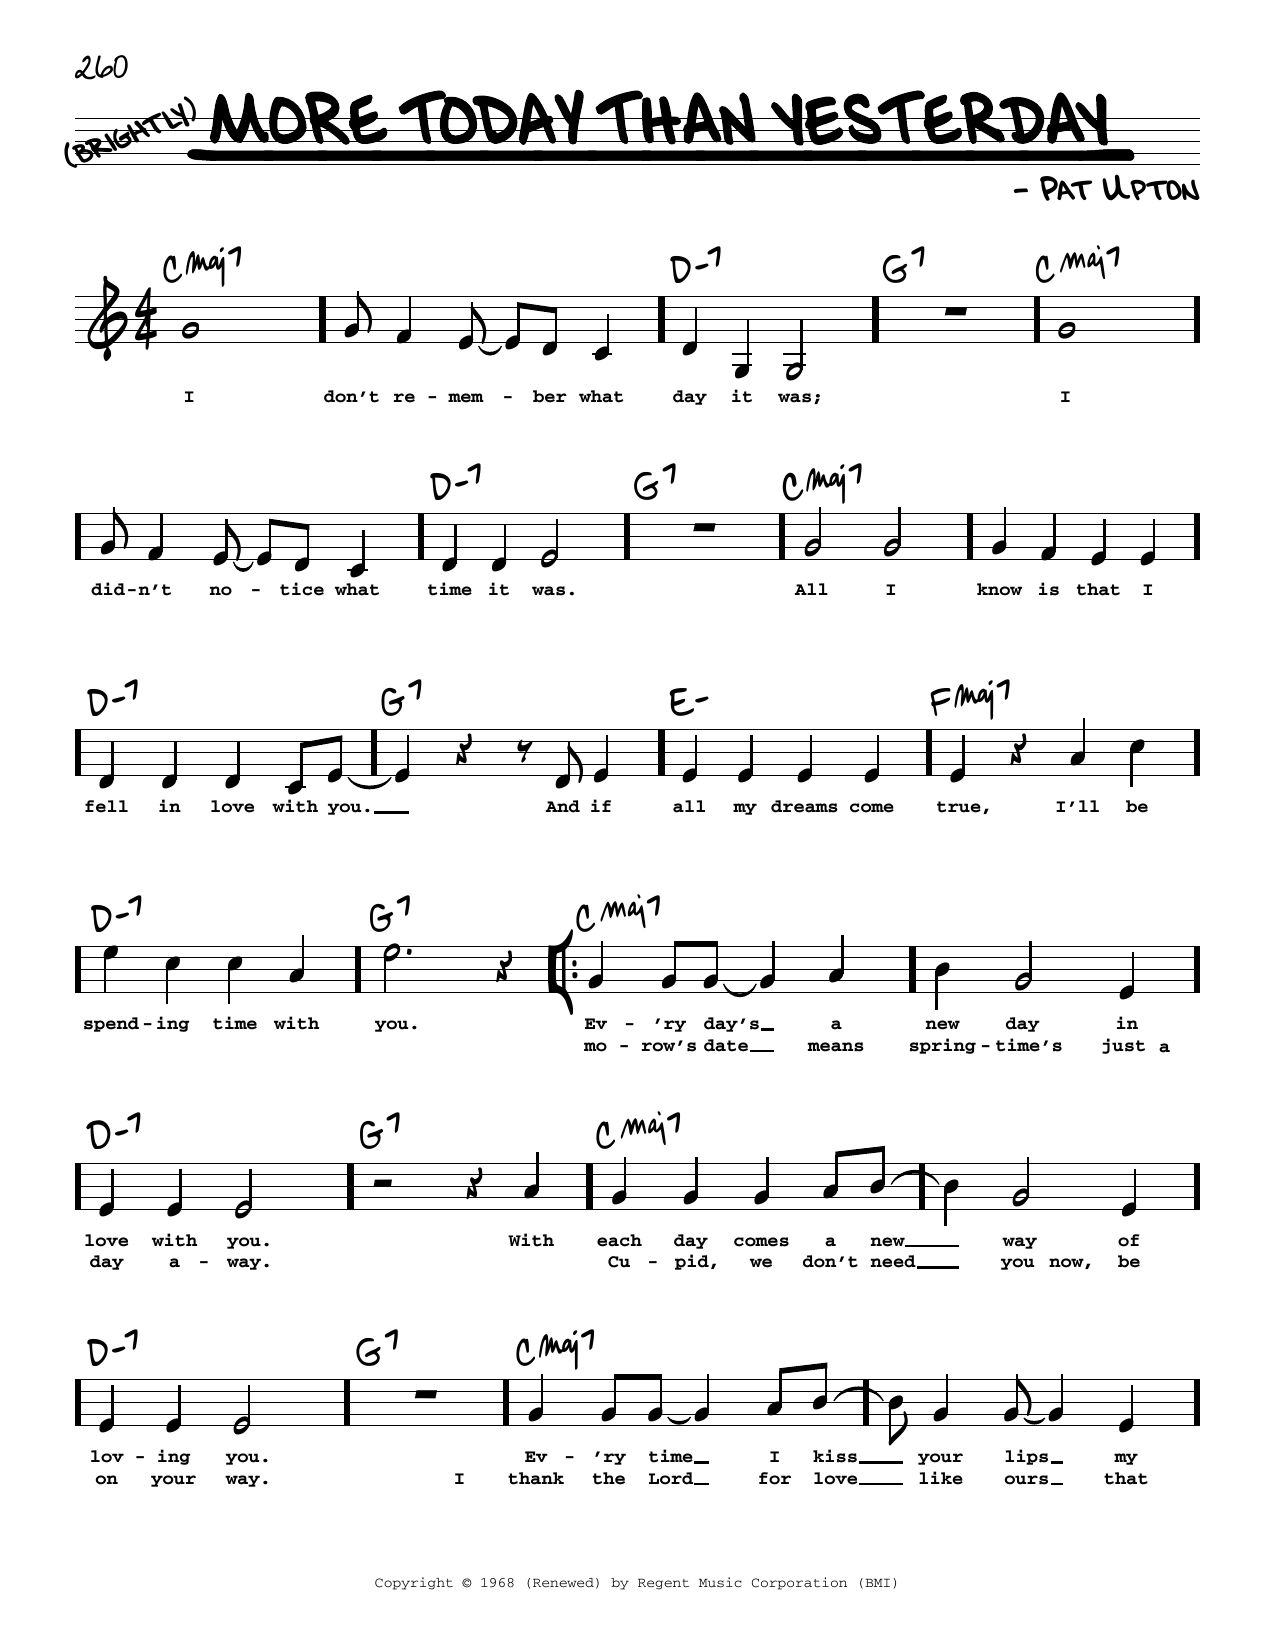 Download Spiral Starecase More Today Than Yesterday (High Voice) Sheet Music